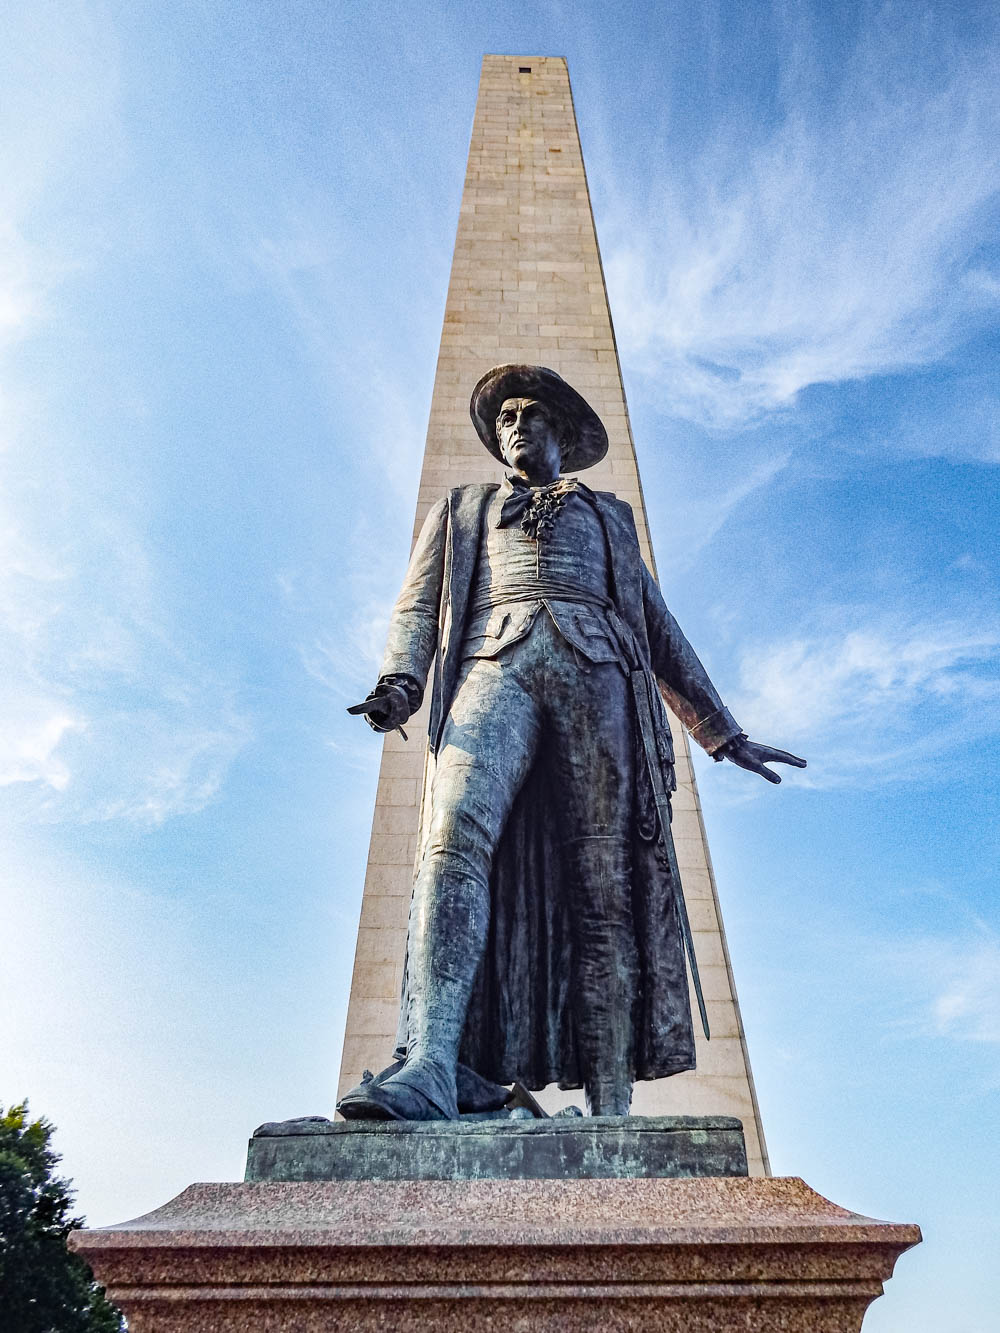 Boston bucket list and the best things to do in Boston: bunker hill monument and statue